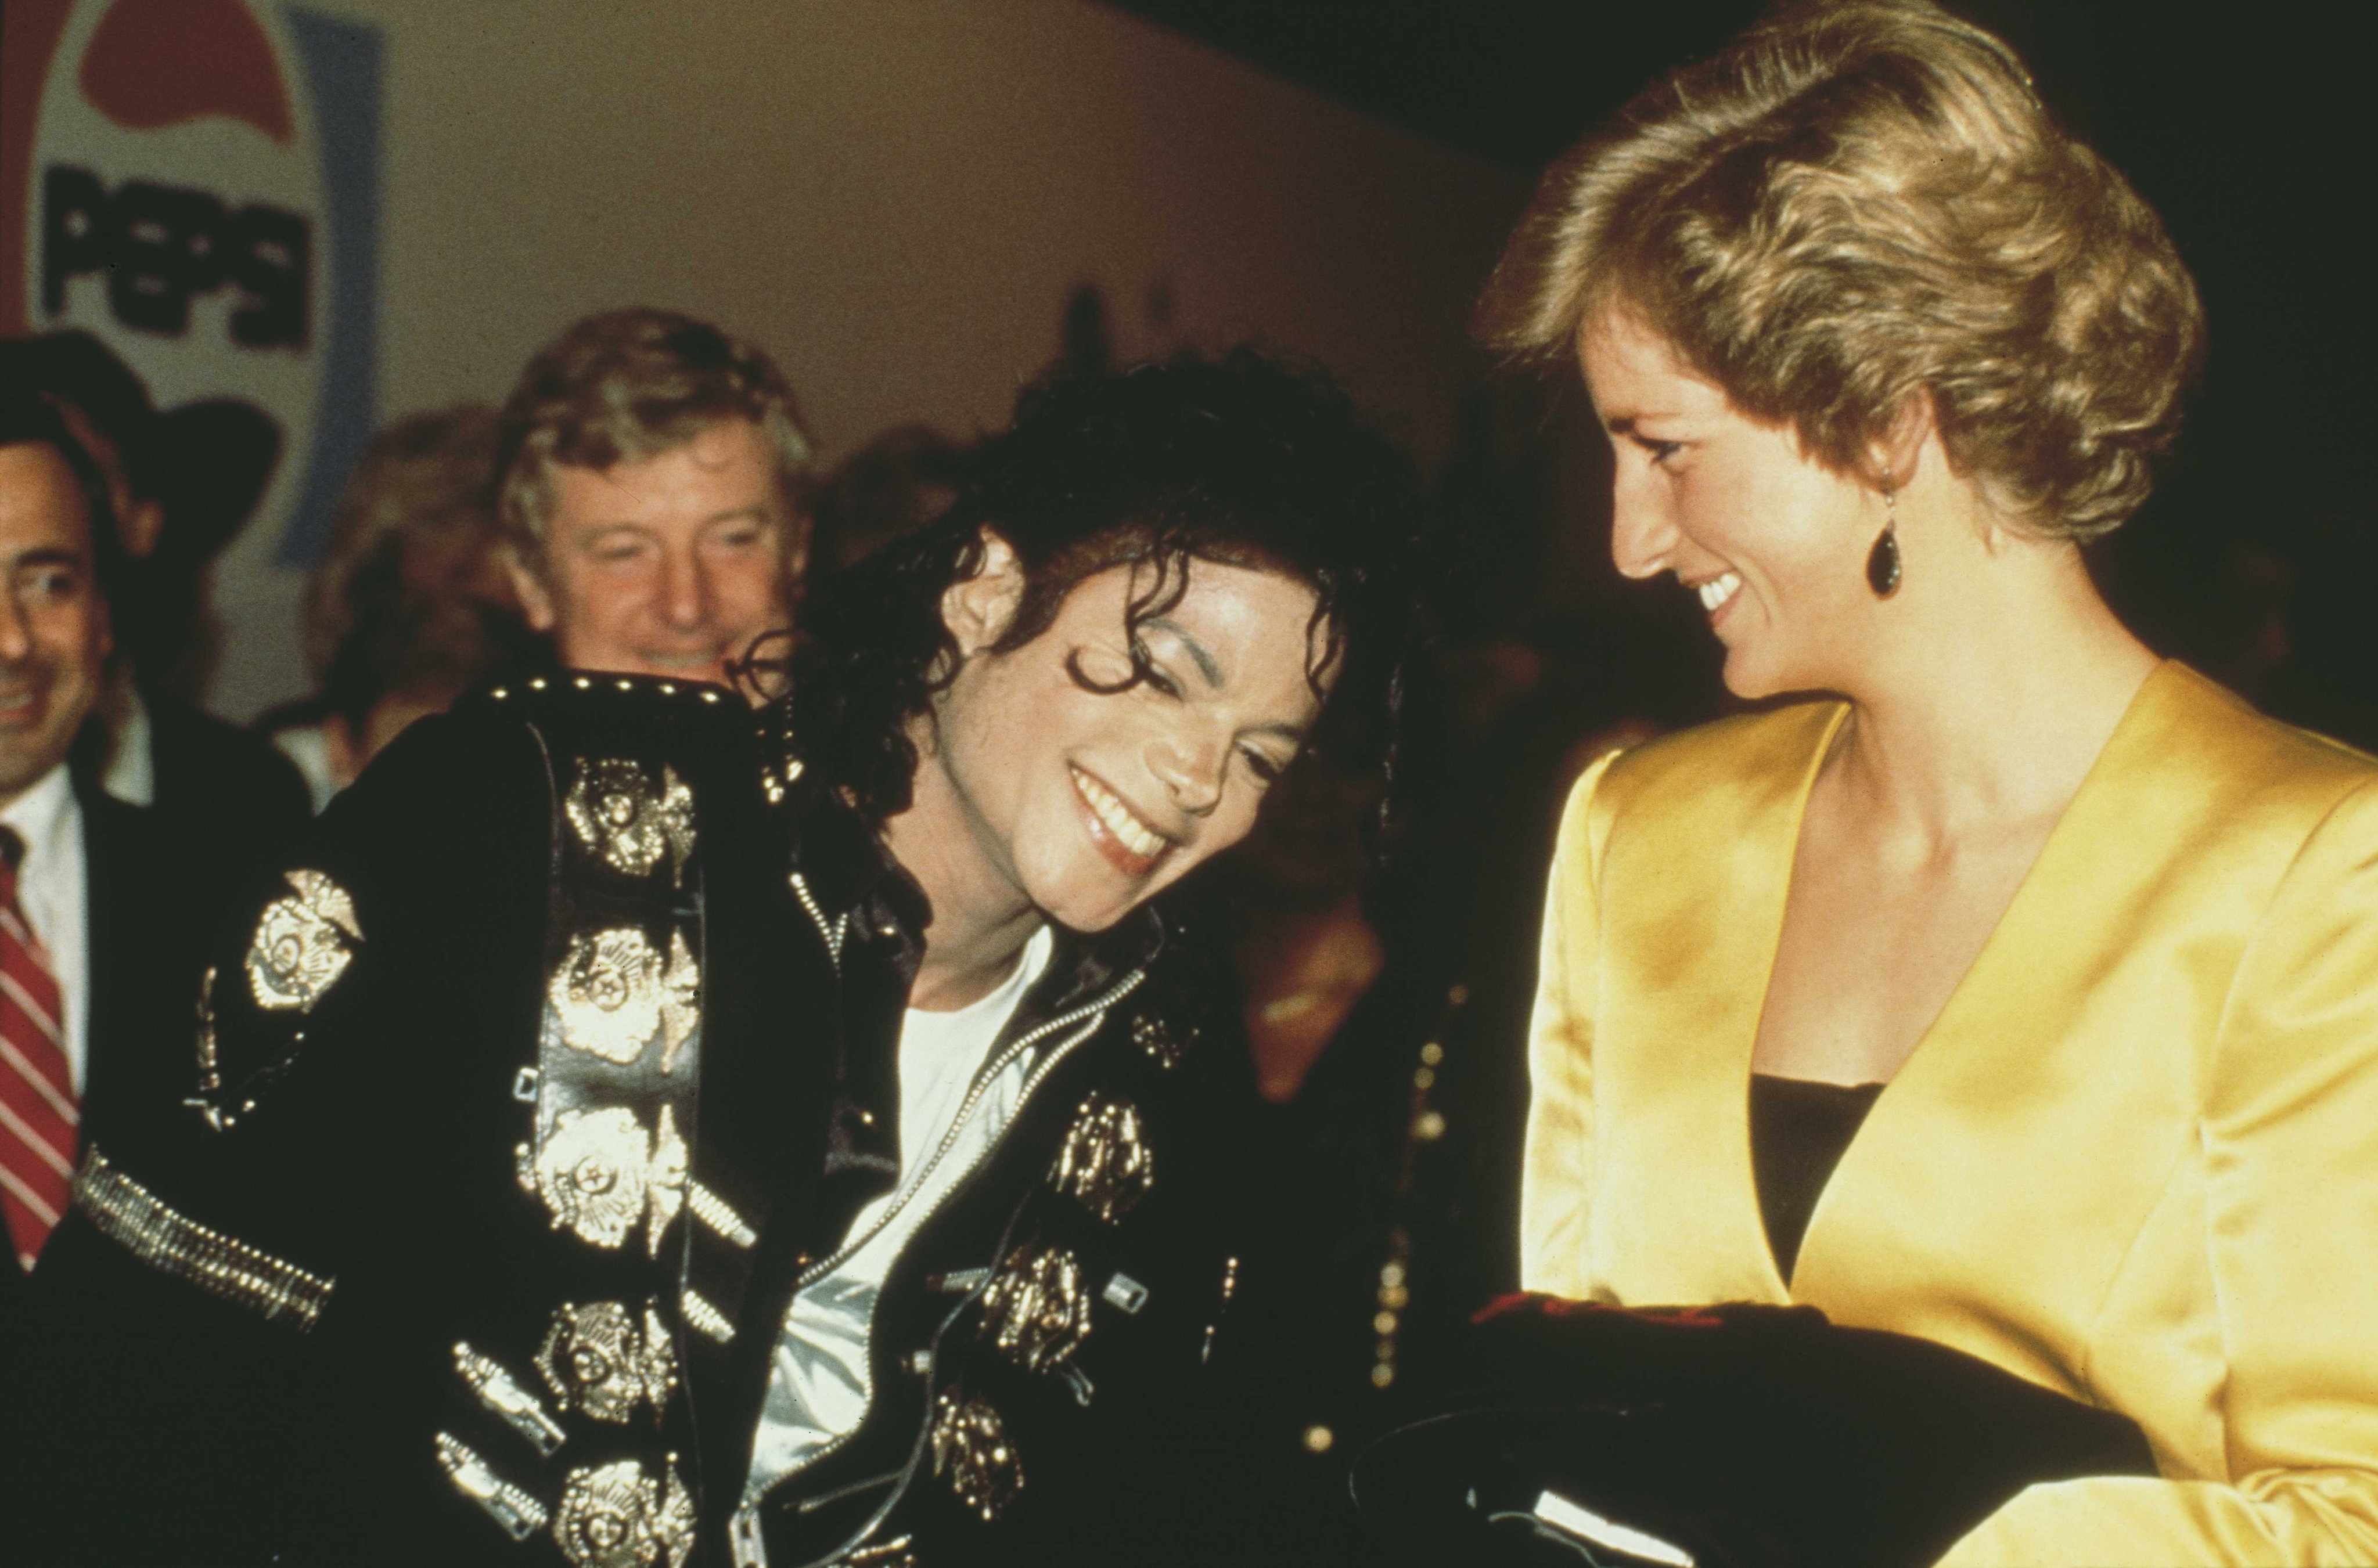 Princess Diana and Michael Jackson appeared to get on instantly when they met backstage at the singer’s Bad concert in London in 1988. Photo: Getty Images